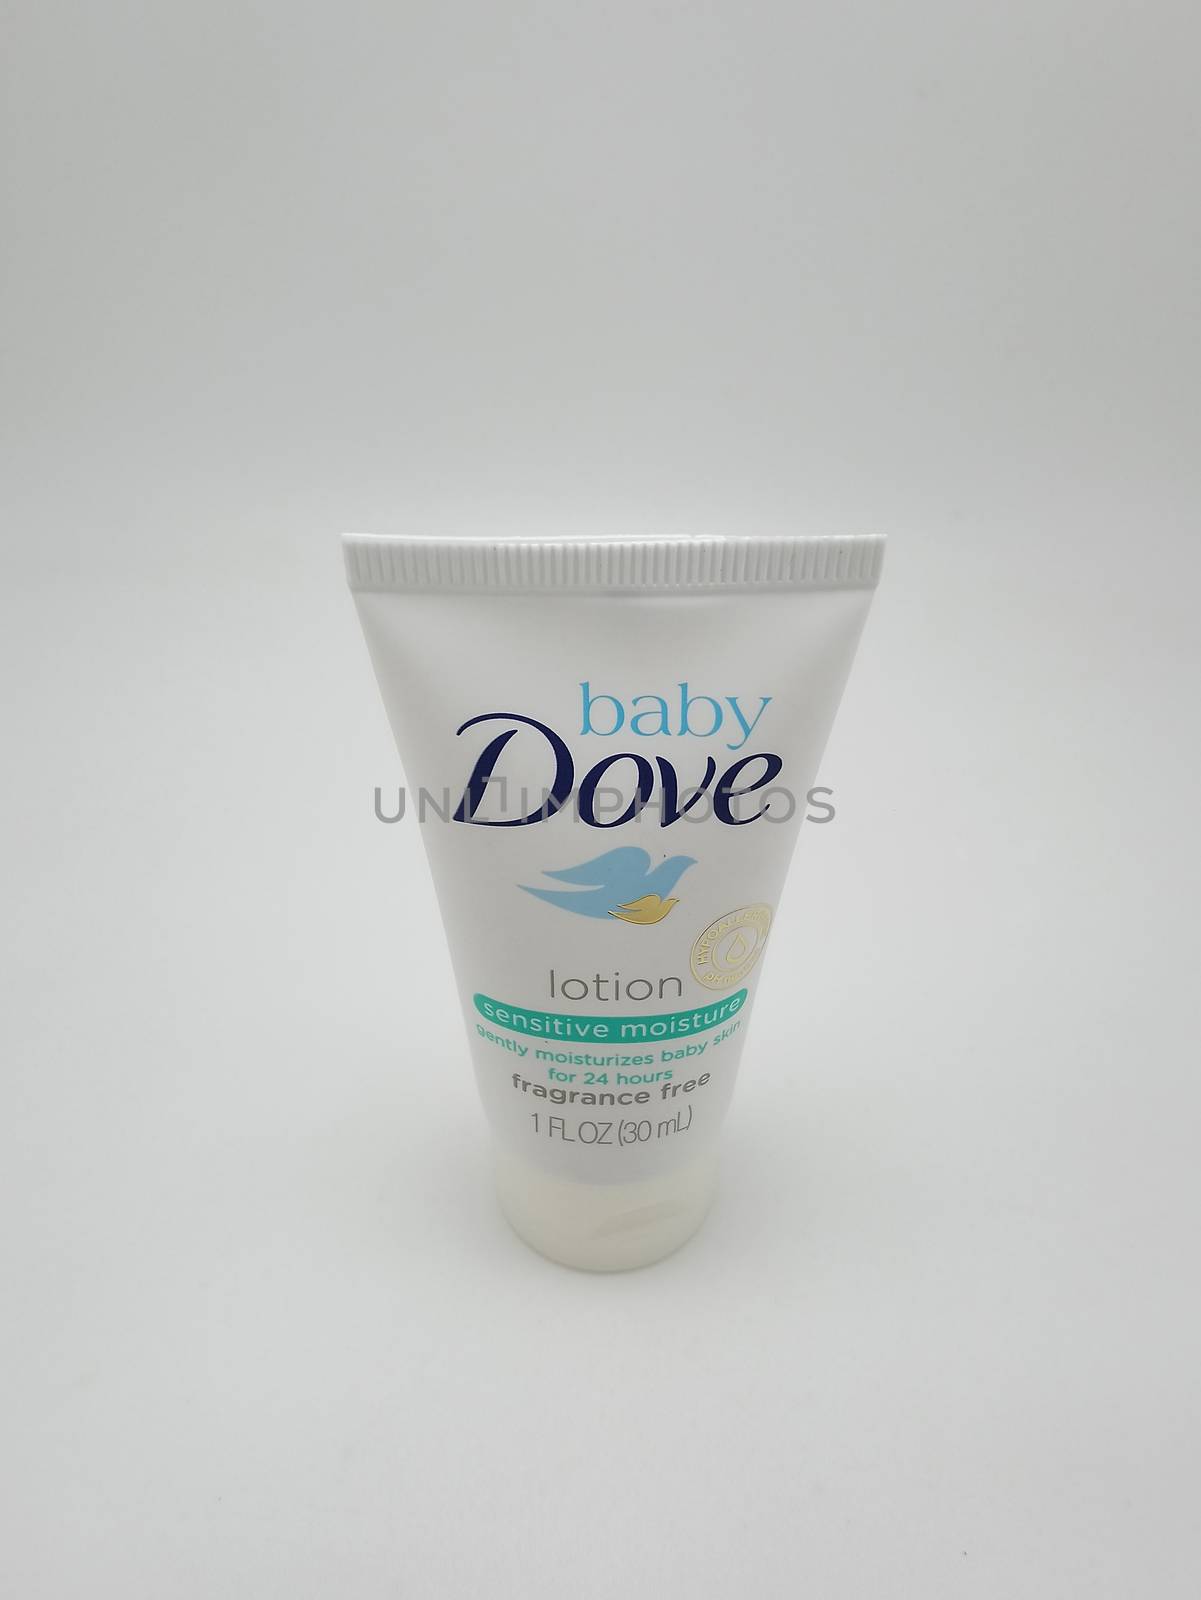 Baby dove lotion in Manila, Philippines by imwaltersy